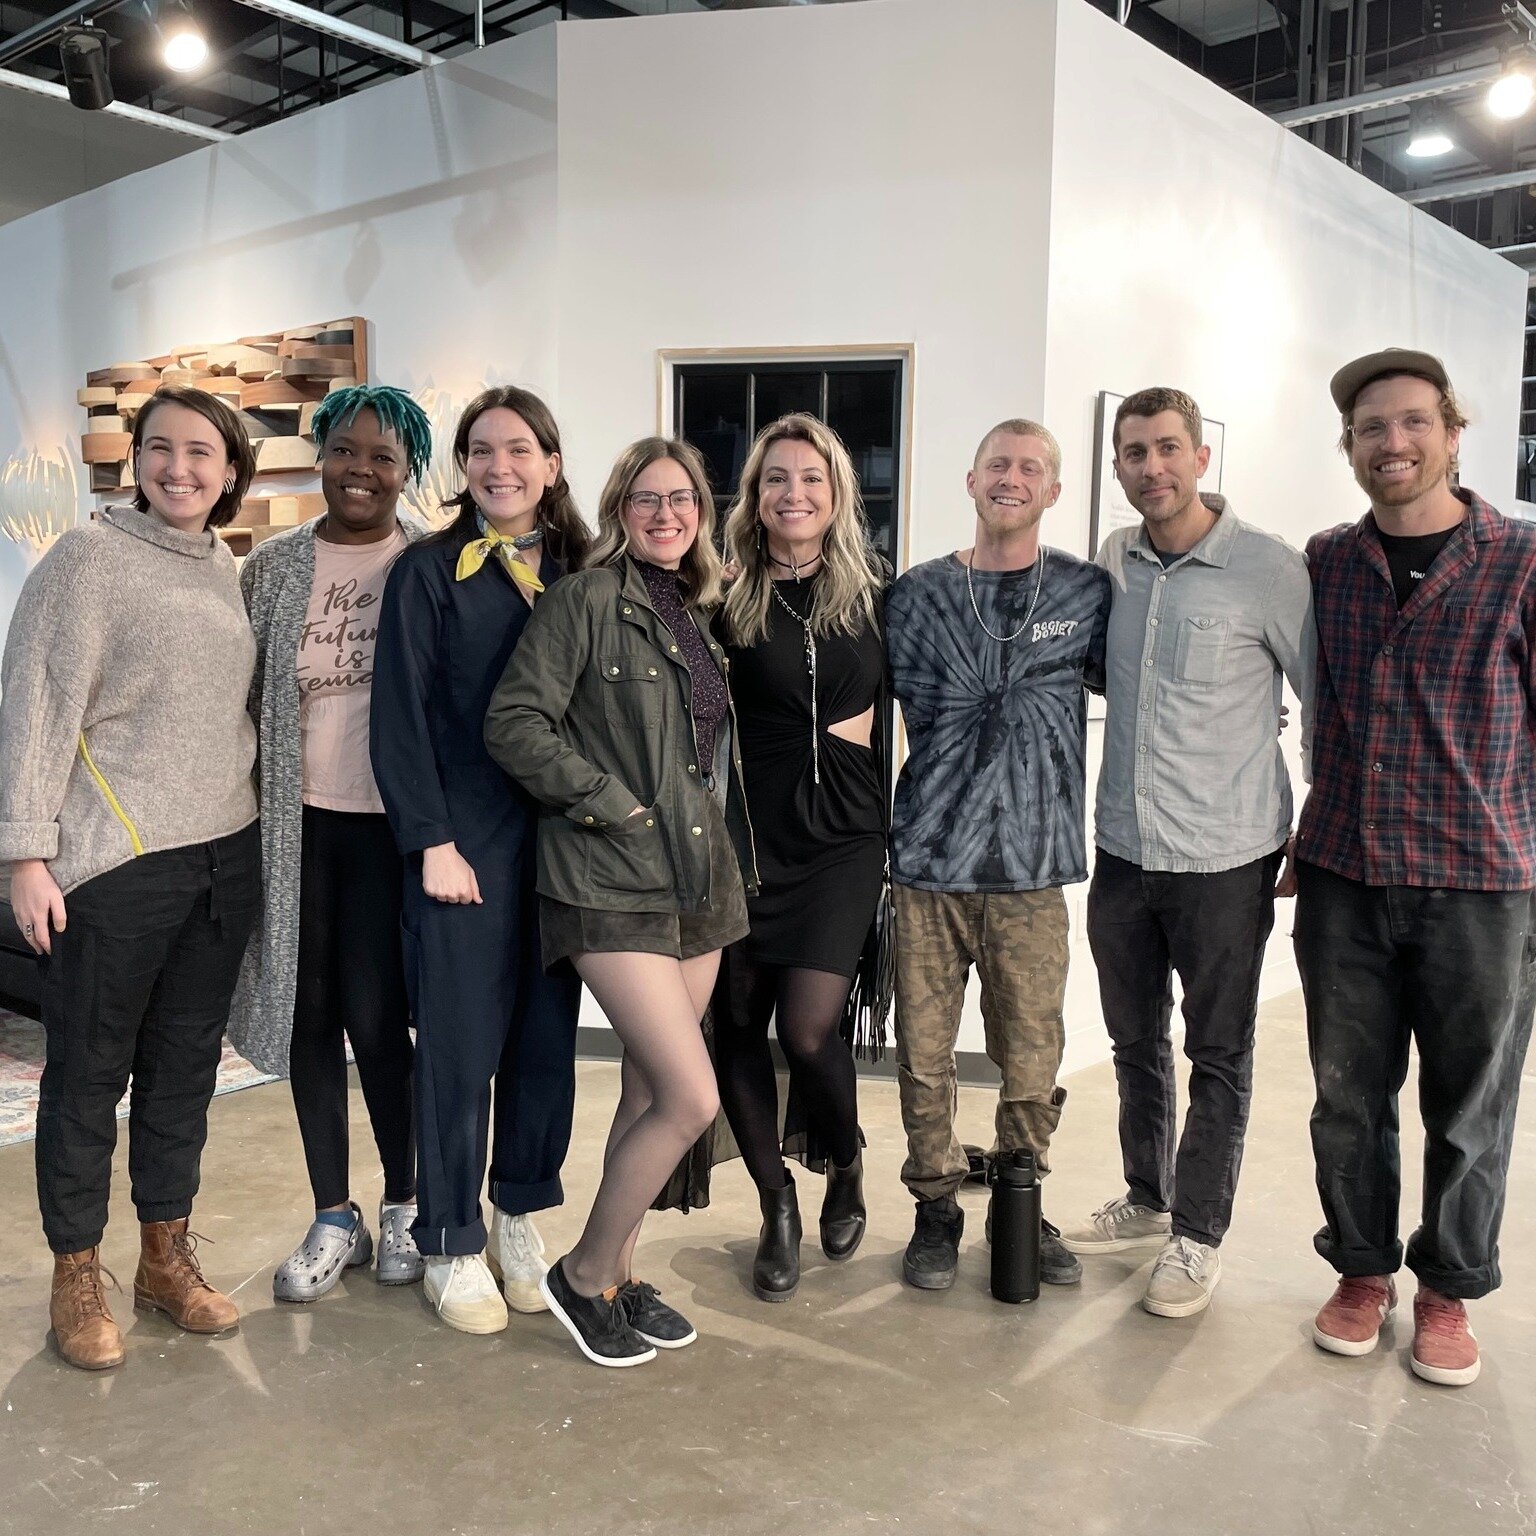 Just this past November, I had the pleasure of working with this group of super-talented makers in @nextfab_phl's Artisan Accelerator program.

Throughout the 8-week experience, we had the opportunity to work directly with NextFab and their incredibl